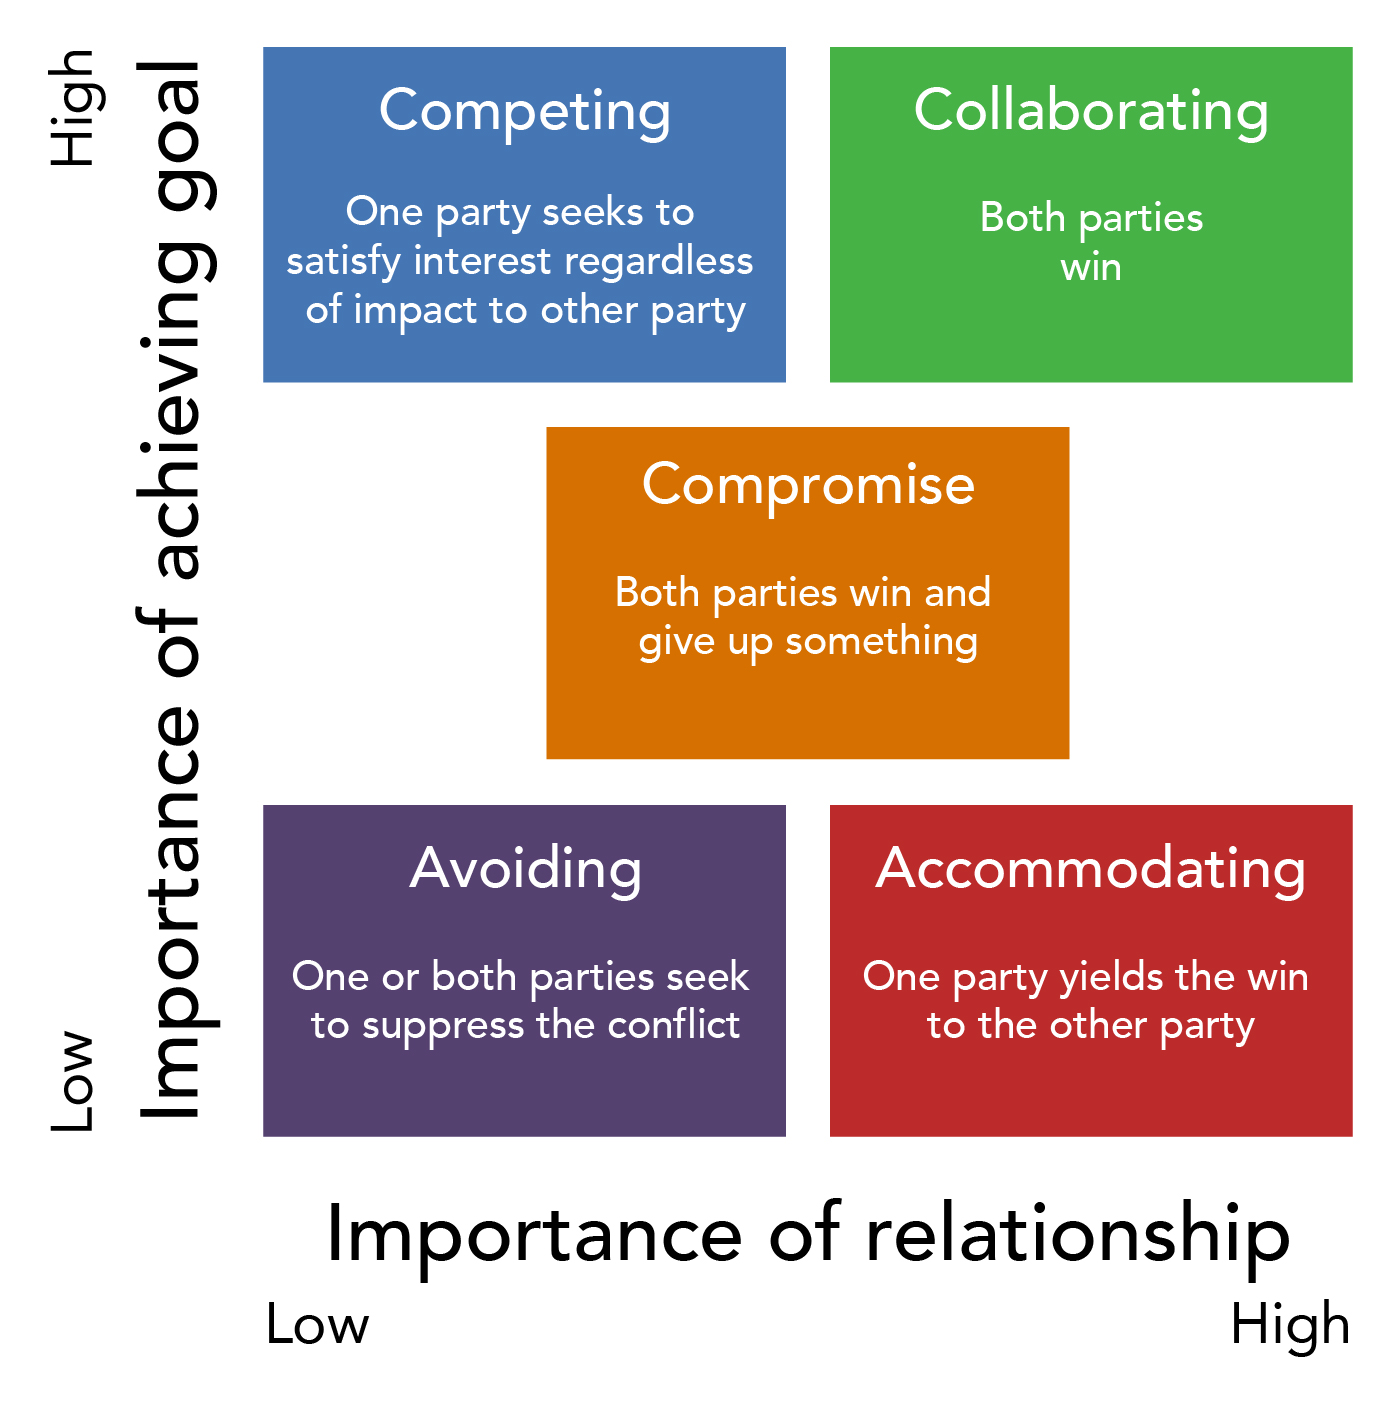 A chart showing the importance of achieving a goal and the importance of relationship in five styles of conflict management. In the competing style, one party seeks to satisfy interest regardless of impact to other party; thus, the goal is very important, and the relationship is not important. In the collaborating style, both parties win, thus the goal is very important and the relationship is very important. In the compromise style, both parties win and give up something; thus, the goal and relationship are somewhat important. In the avoiding style, one or both parties seek to suppress the conflict; thus, the goal and relationship are not important. In accommodating style, one party yields the win to the other party; thus, the goal is not important and the relationship is very important. 